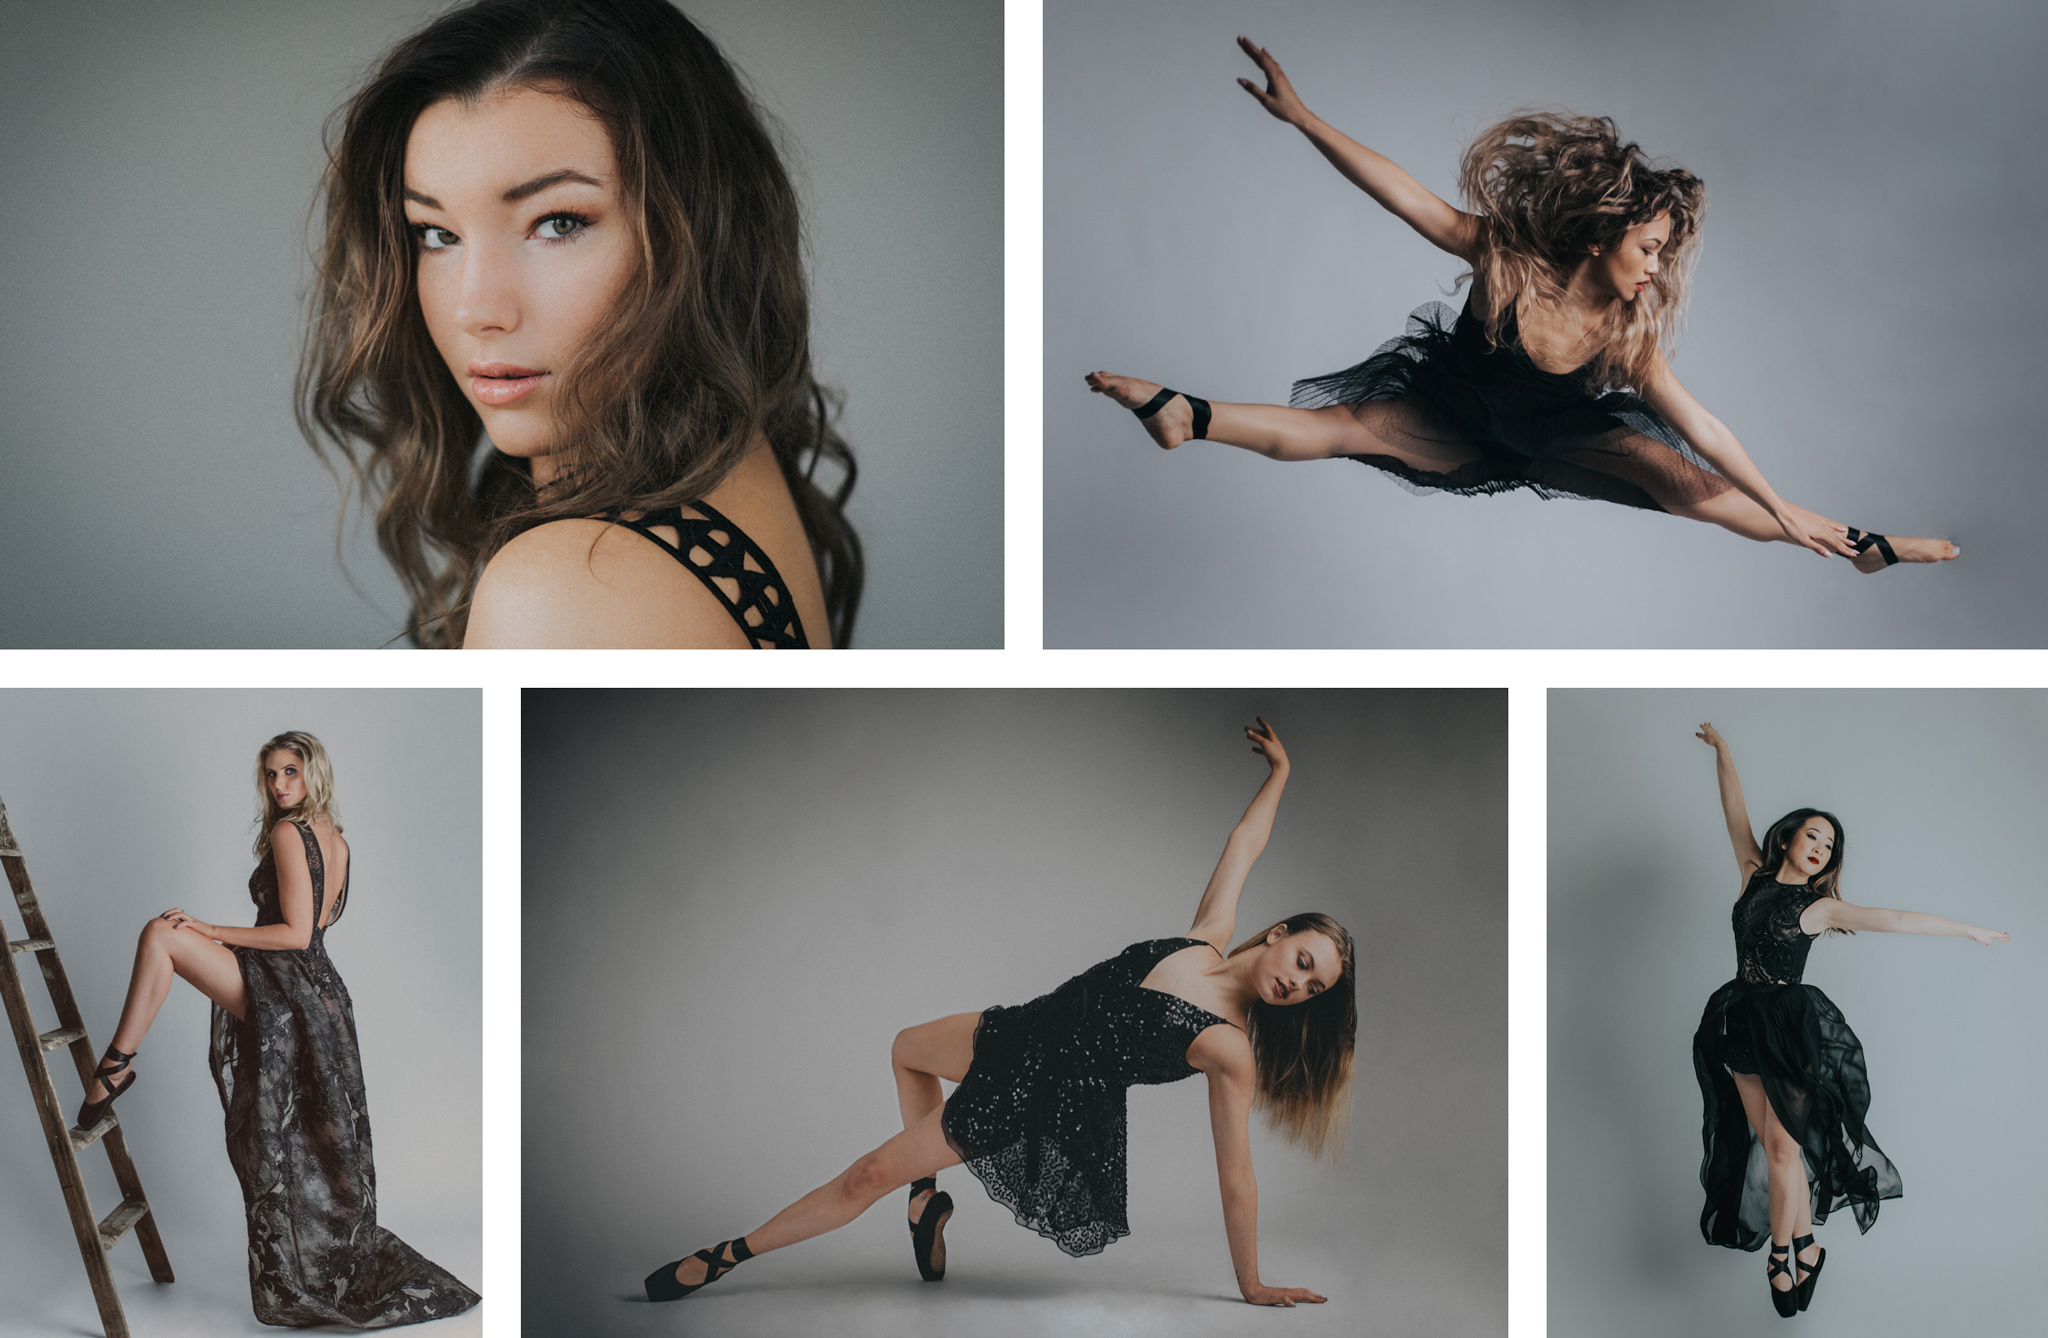 best dance photography in melbourne - Souri creates stunning photographs in the series ballerina en noir in Melbourne. Studio Dance Photography with a creative touch - black dresses.